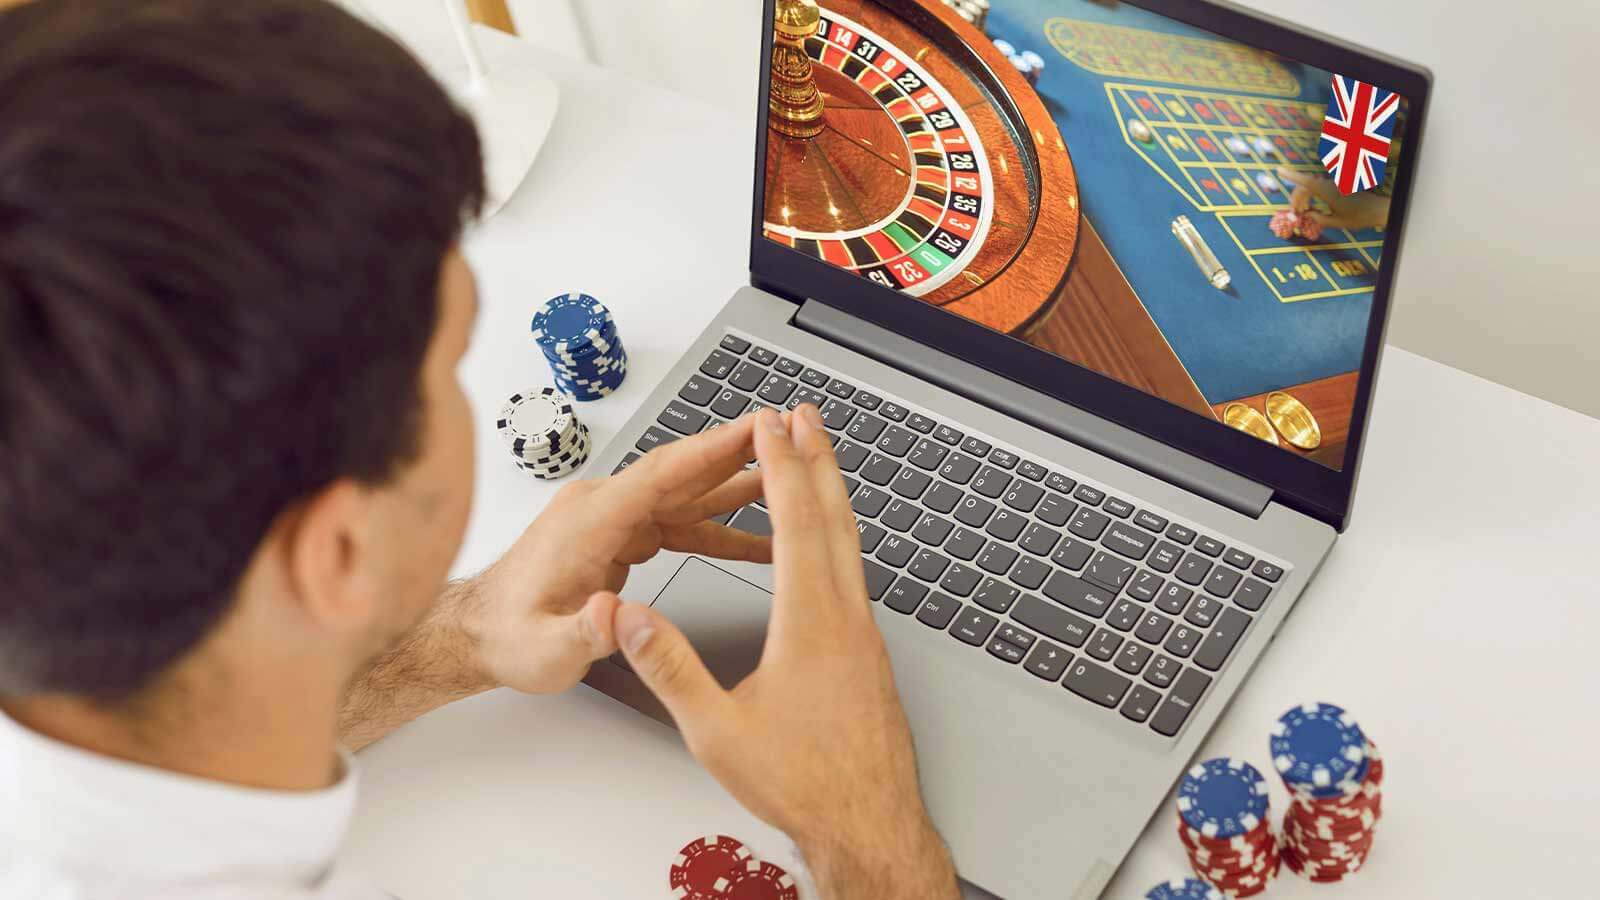 Are things different in terms of online gambling